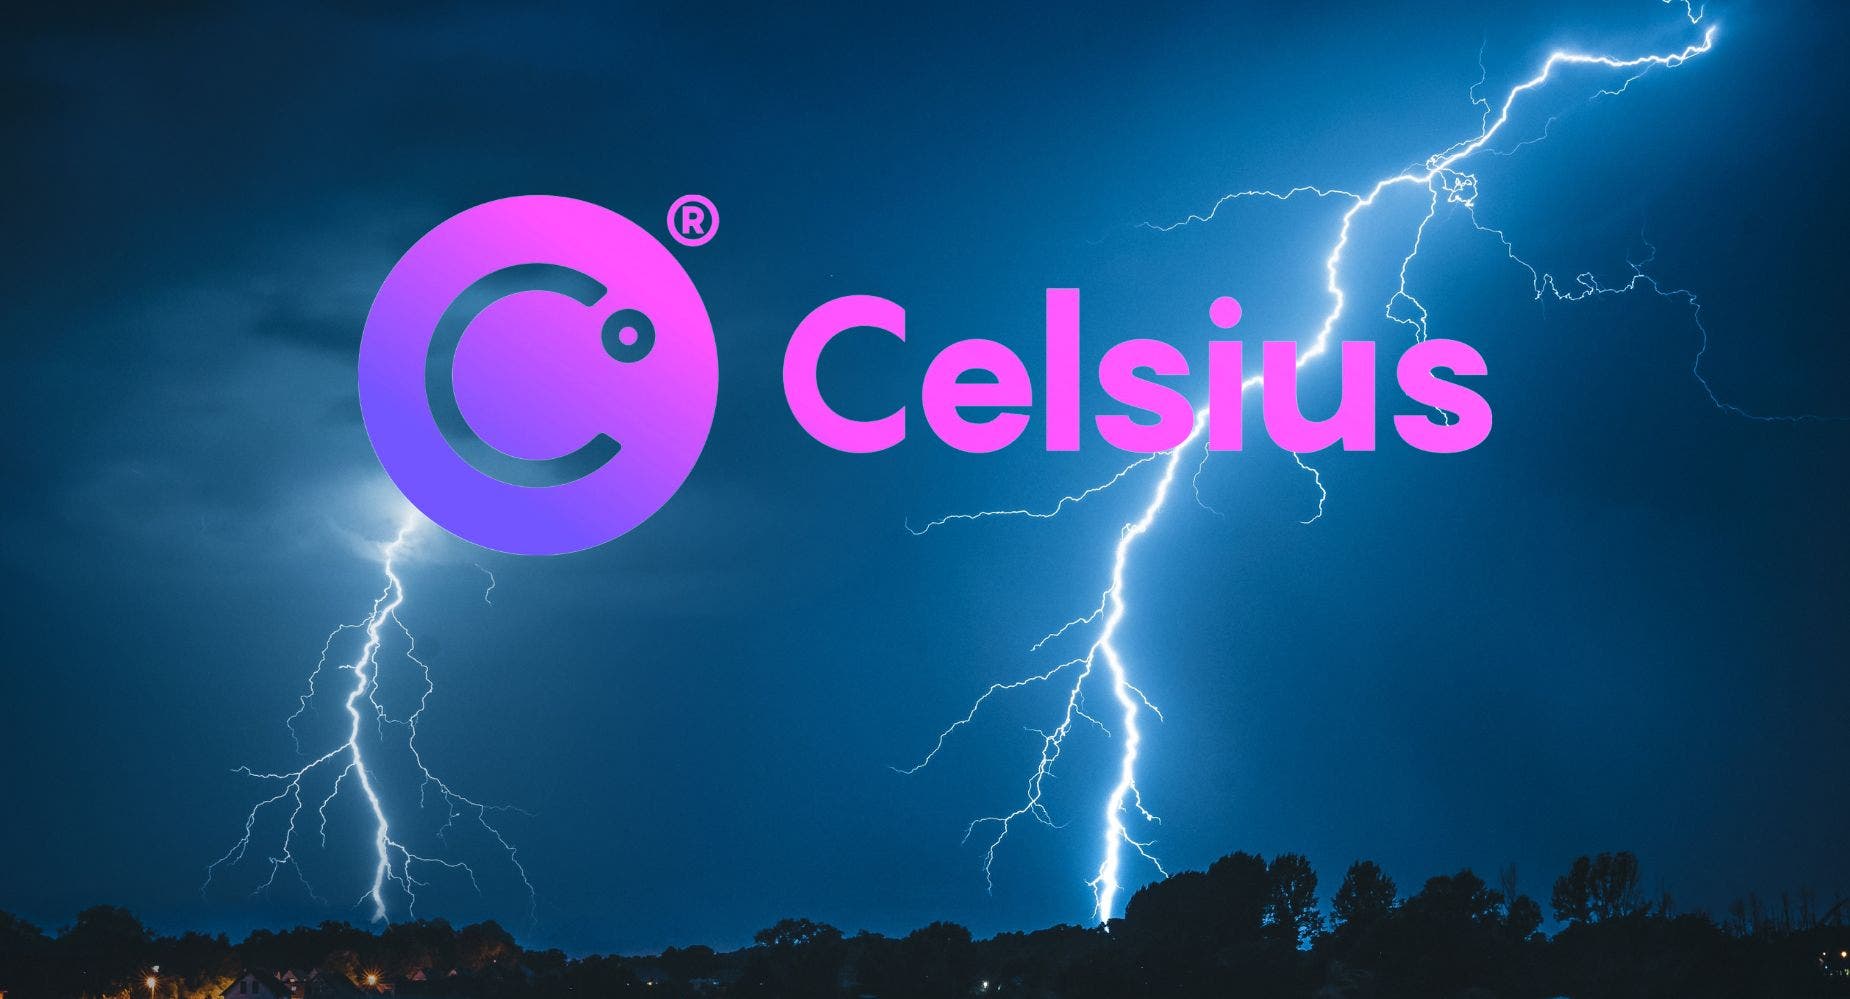 Celsius Network's Rebranding Plan Sparks Outrage In Crypto Community